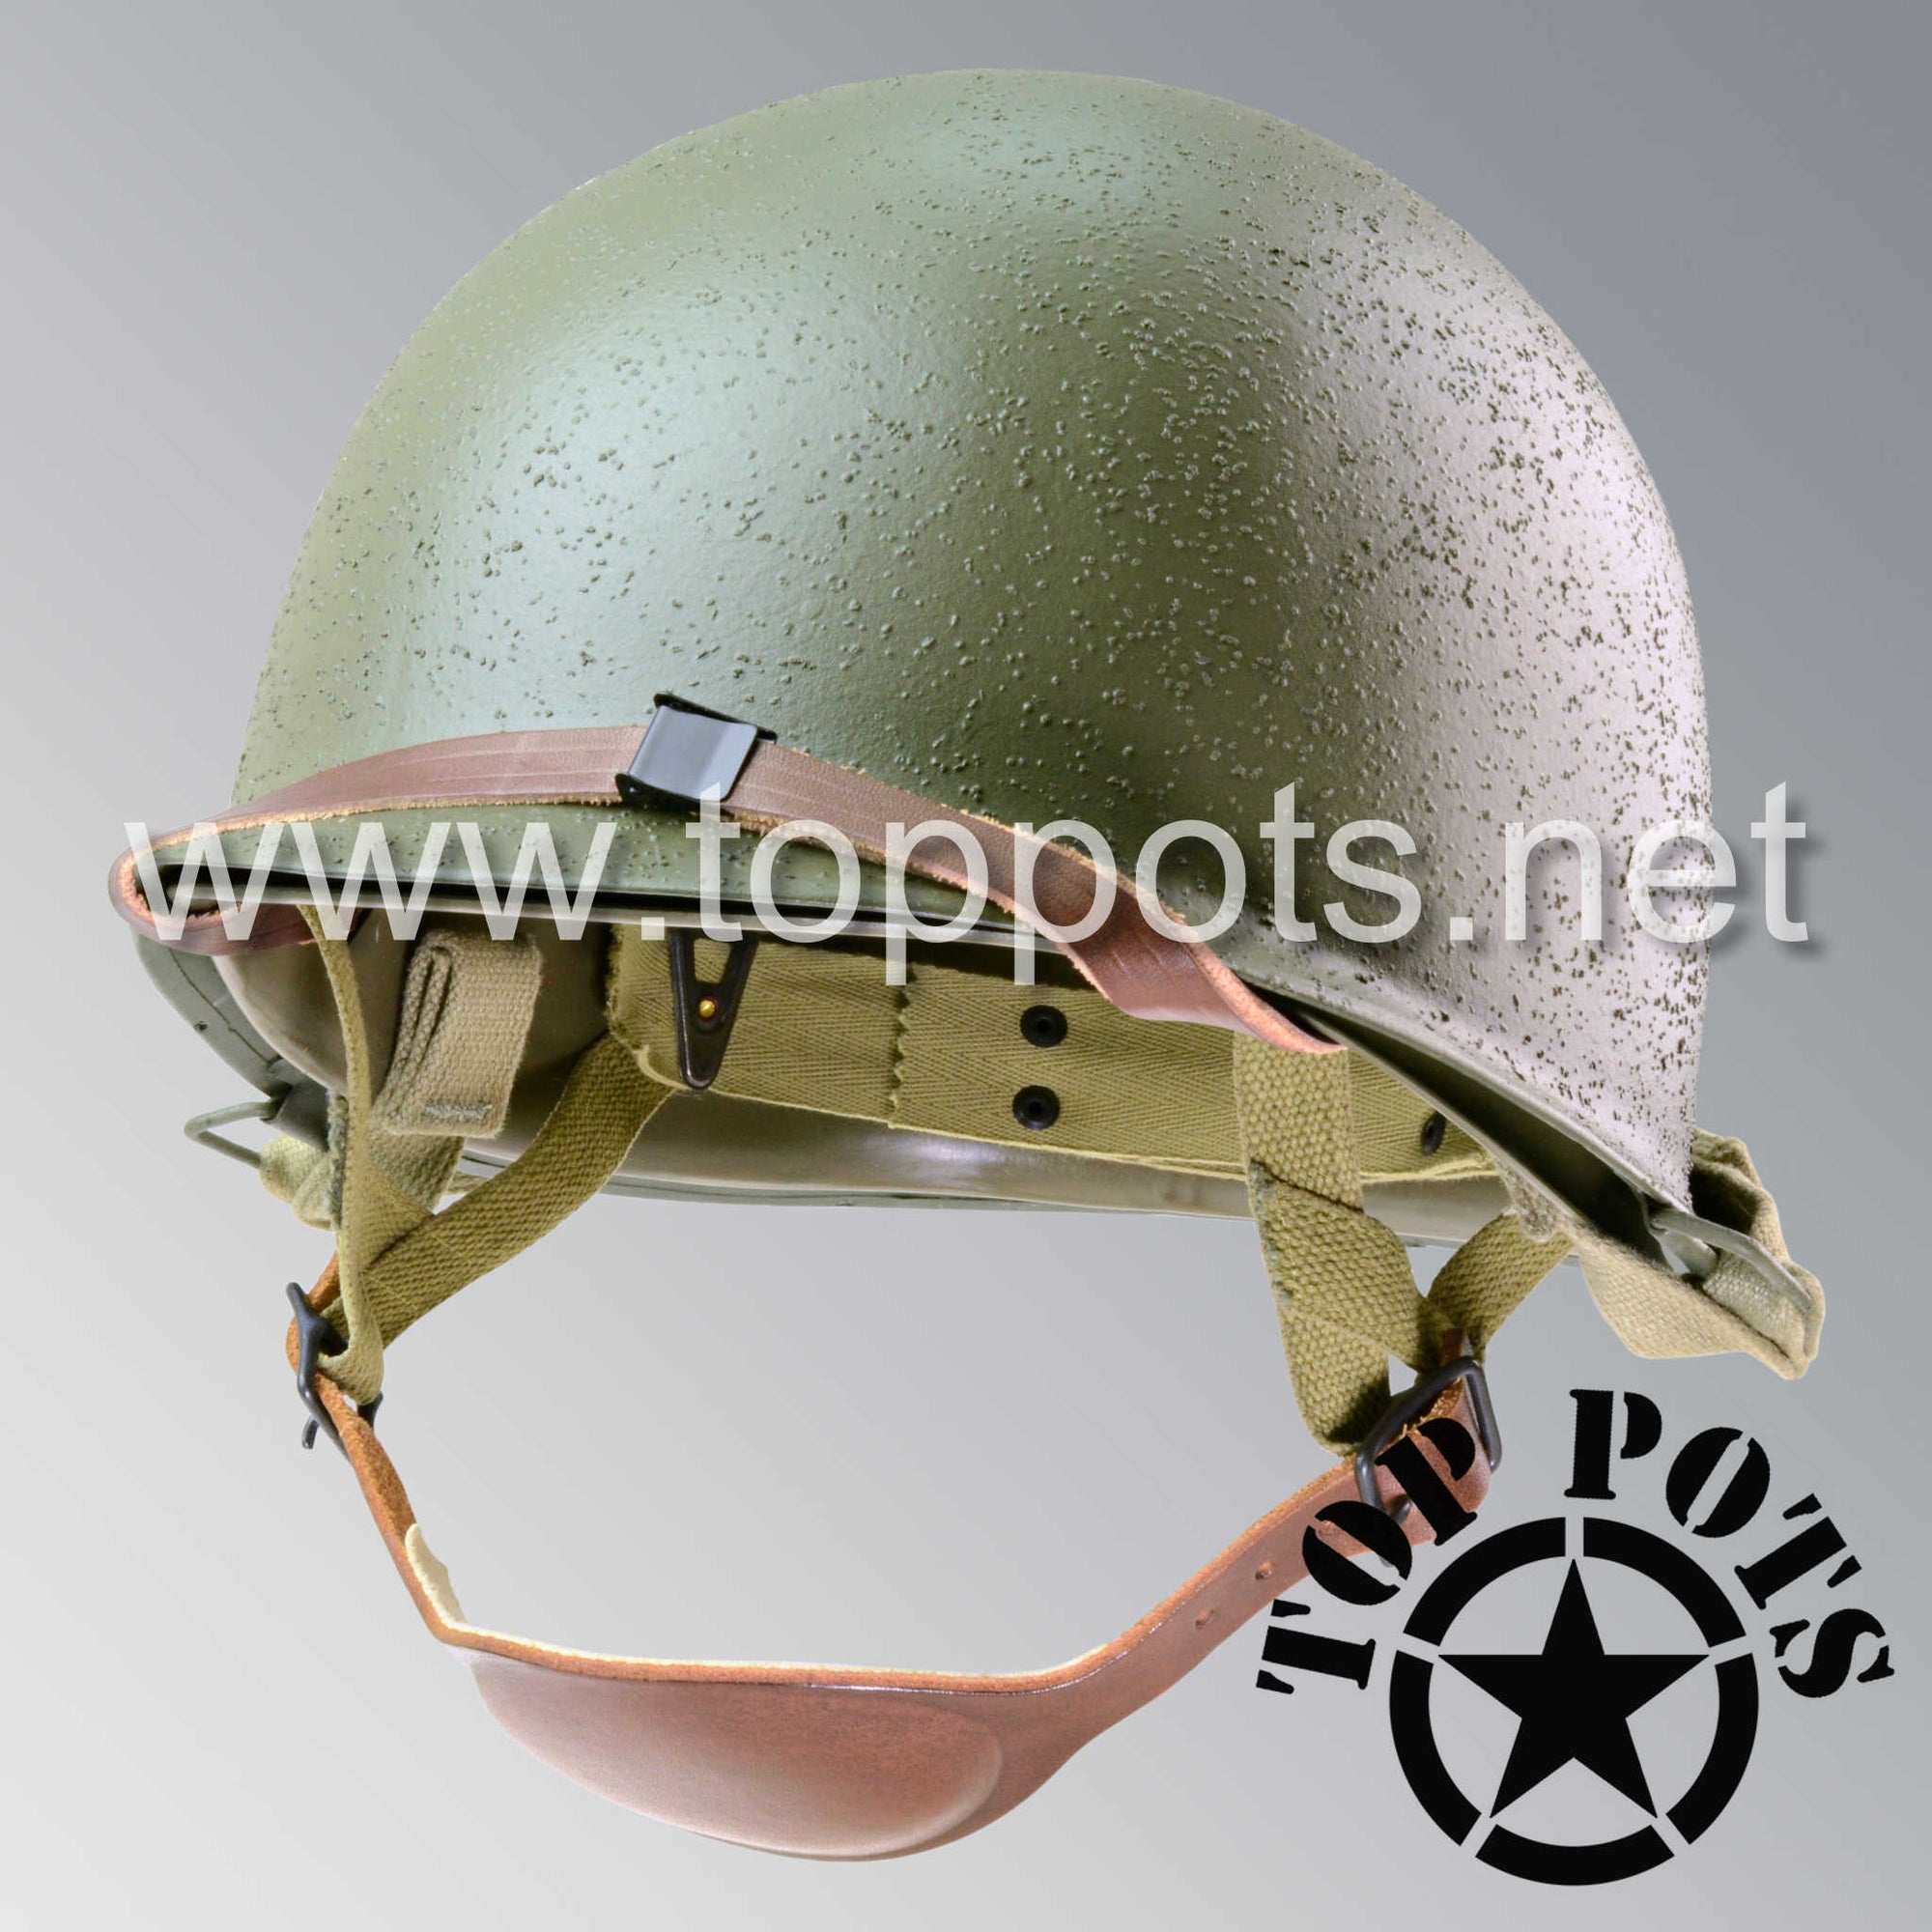 WWII US Army Reproduction M1C Paratrooper Airborne Helmet Swivel Bale Shell and Liner with Inland A Straps